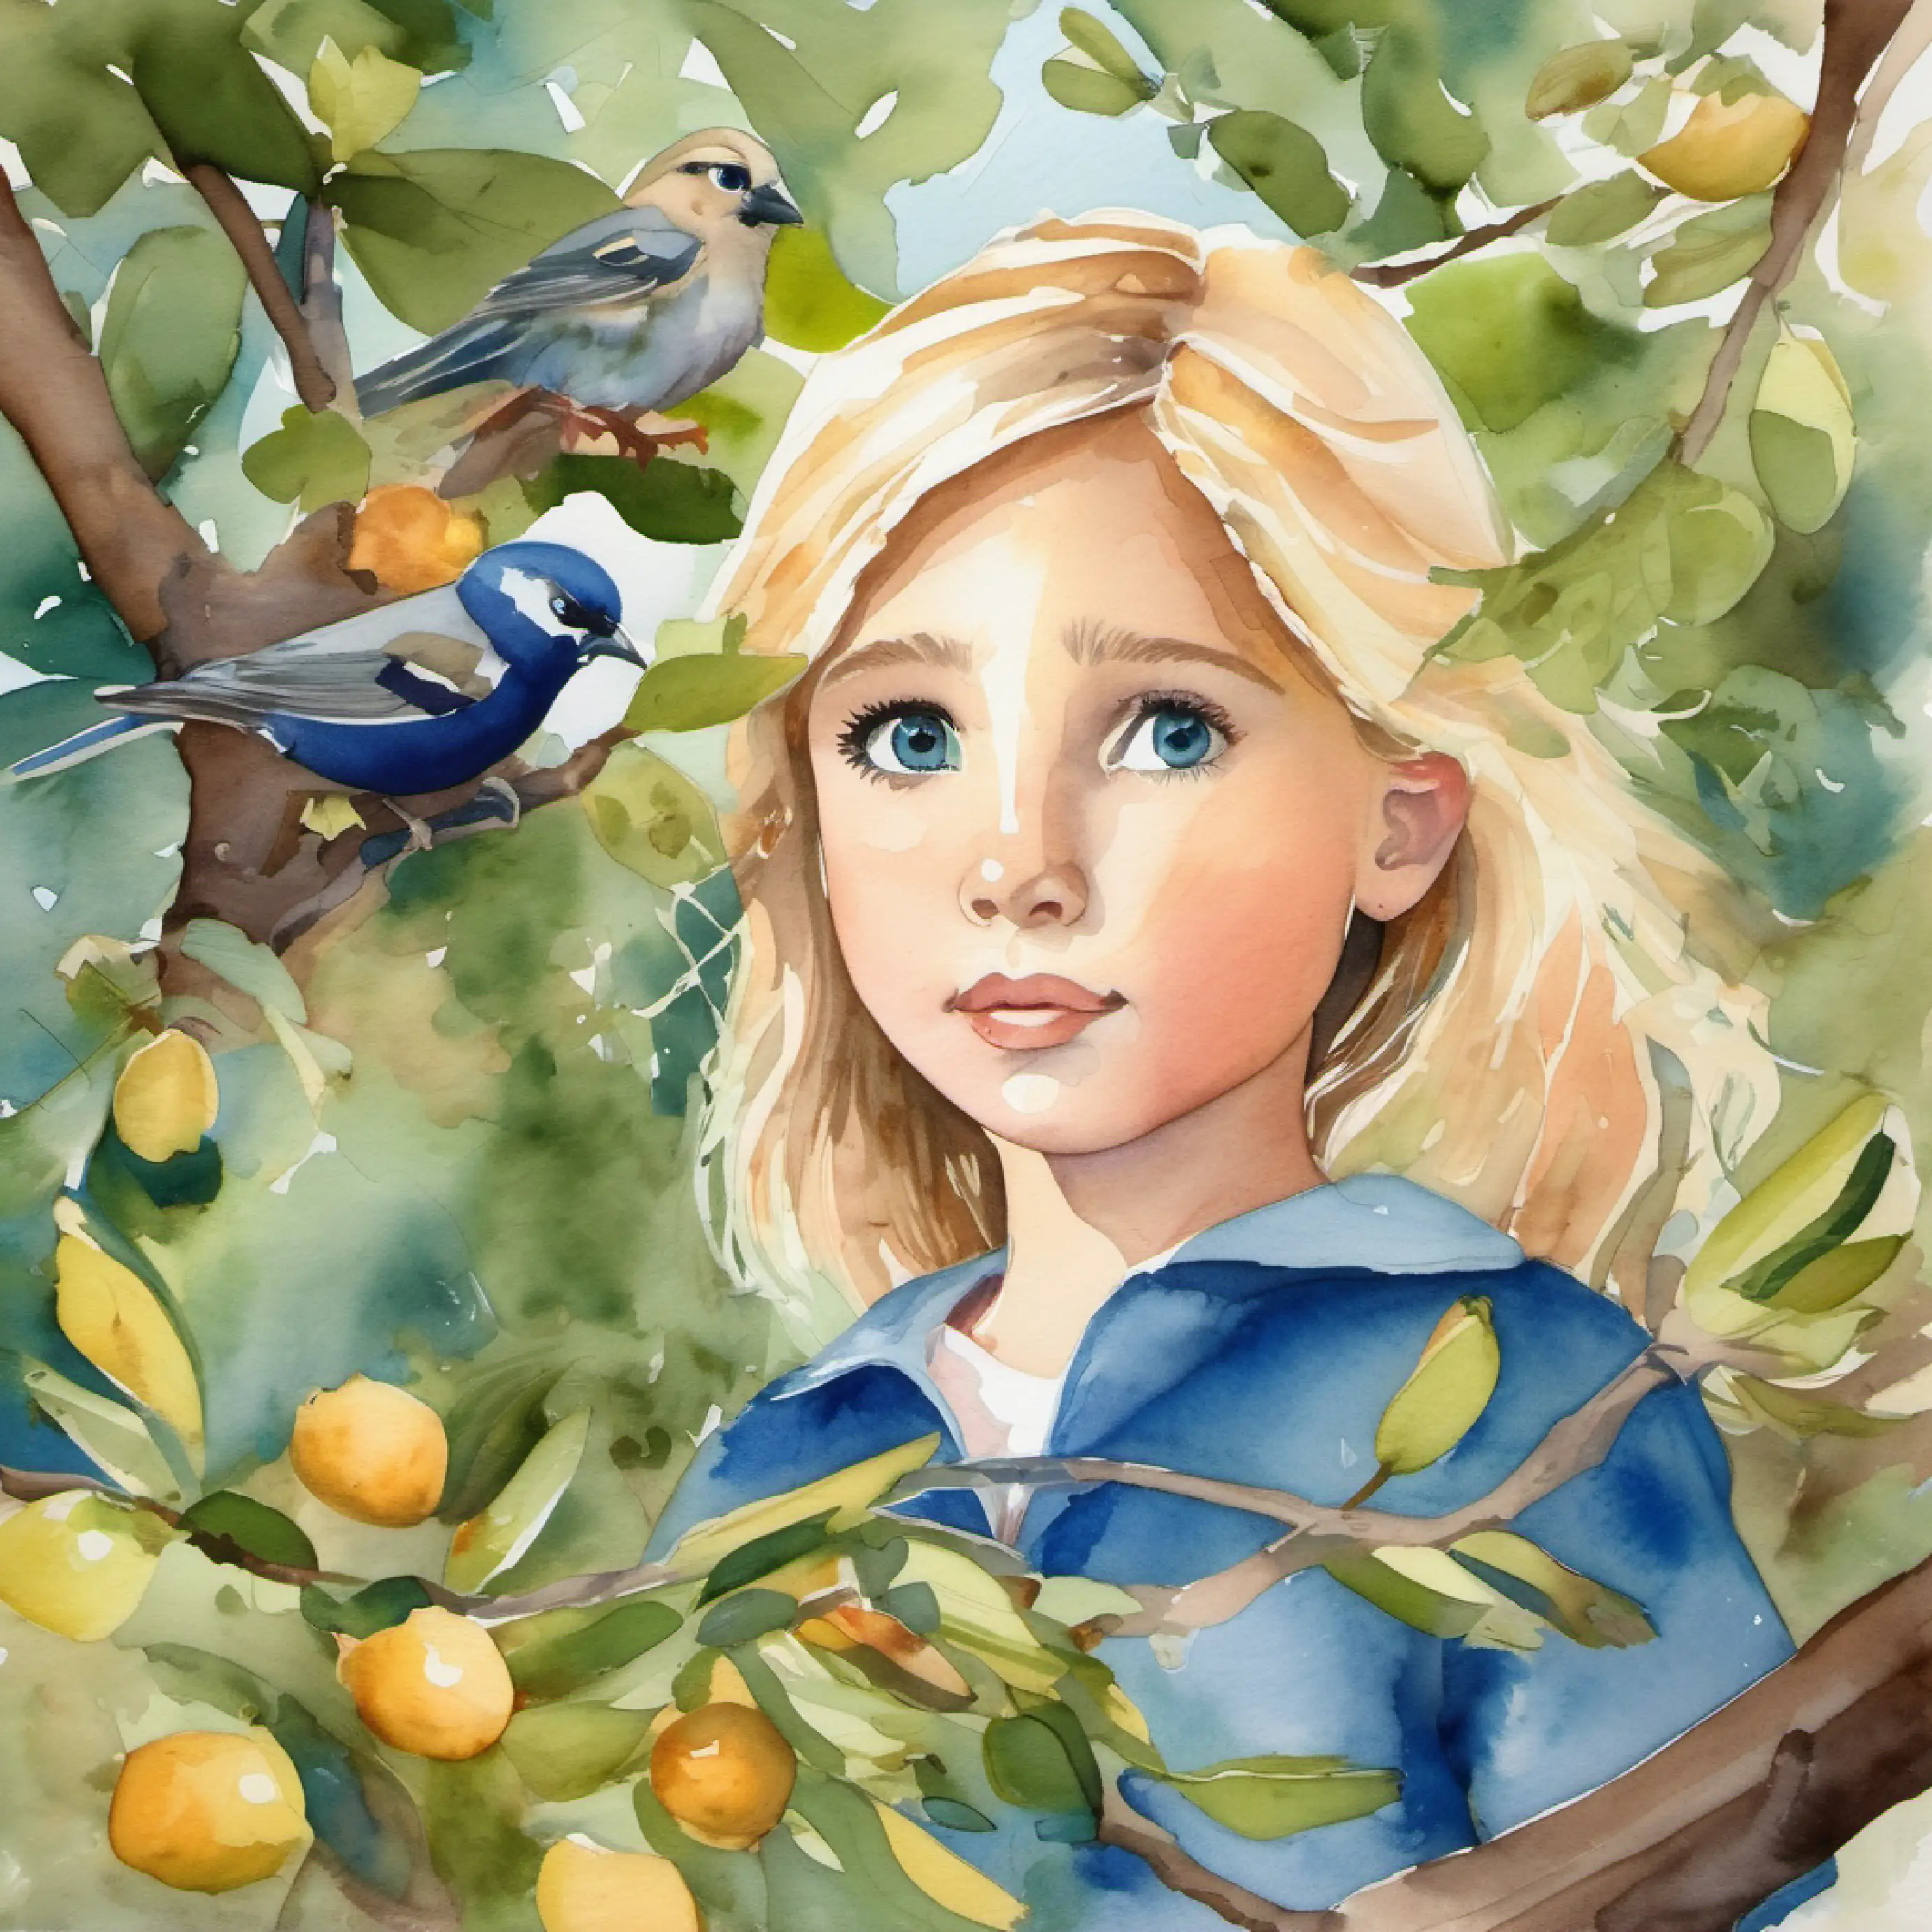 Girl with blonde hair, olive skin, and blue eyes realizes the birds' nest is in a tree.